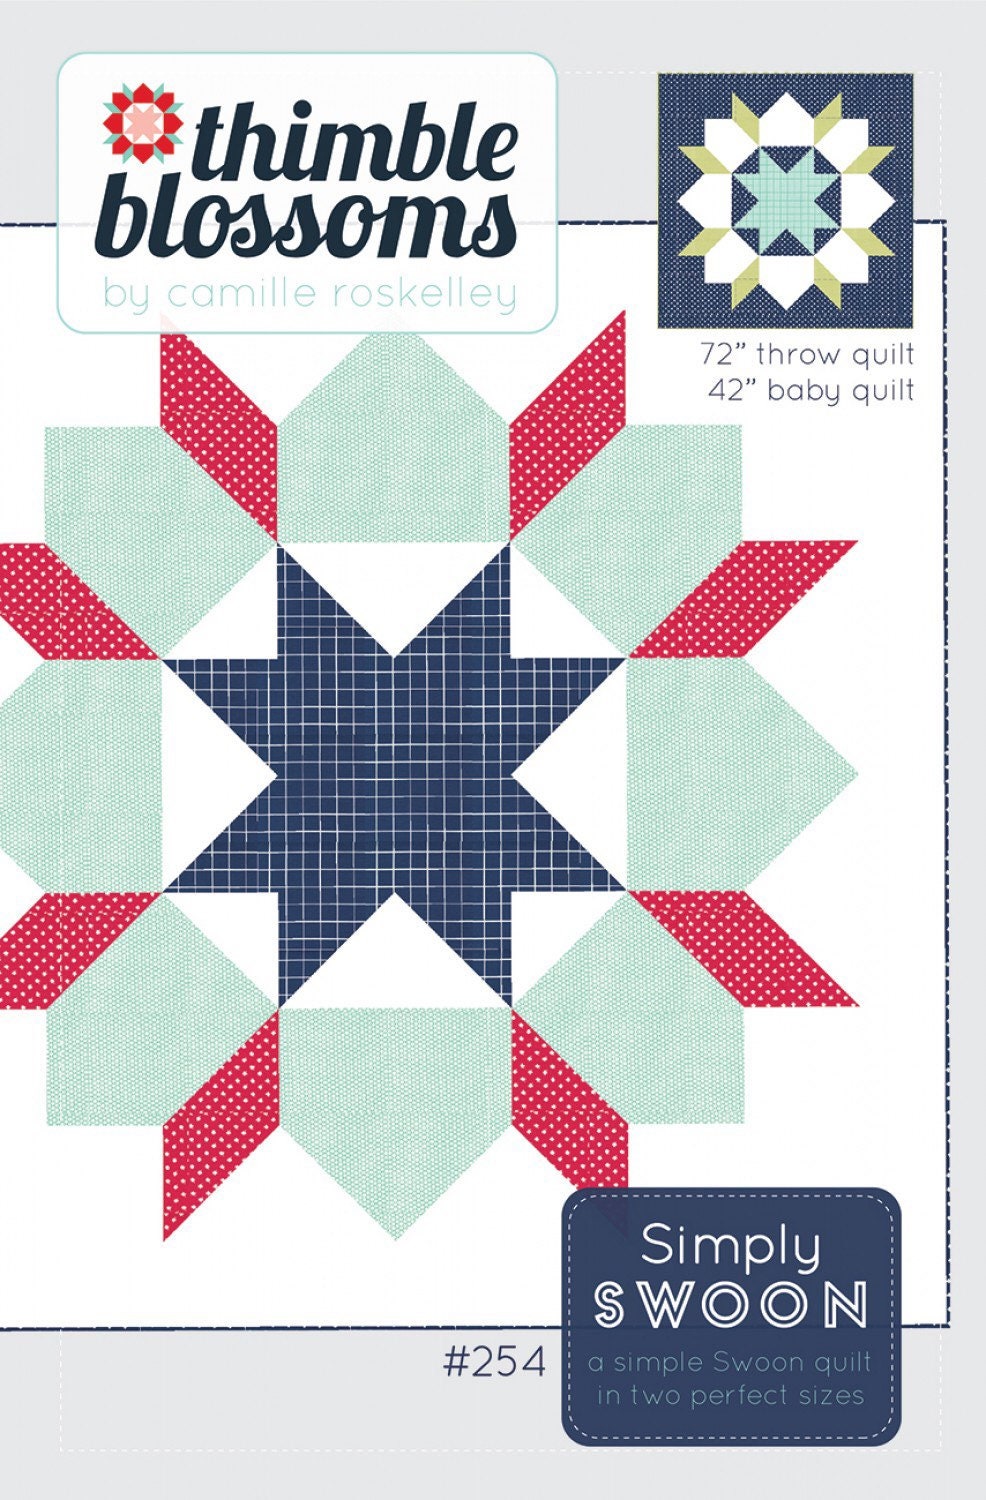 Simply Swoon Quilt Pattern - Thimble Blossoms - Camille Roskelley - 2 Sizes